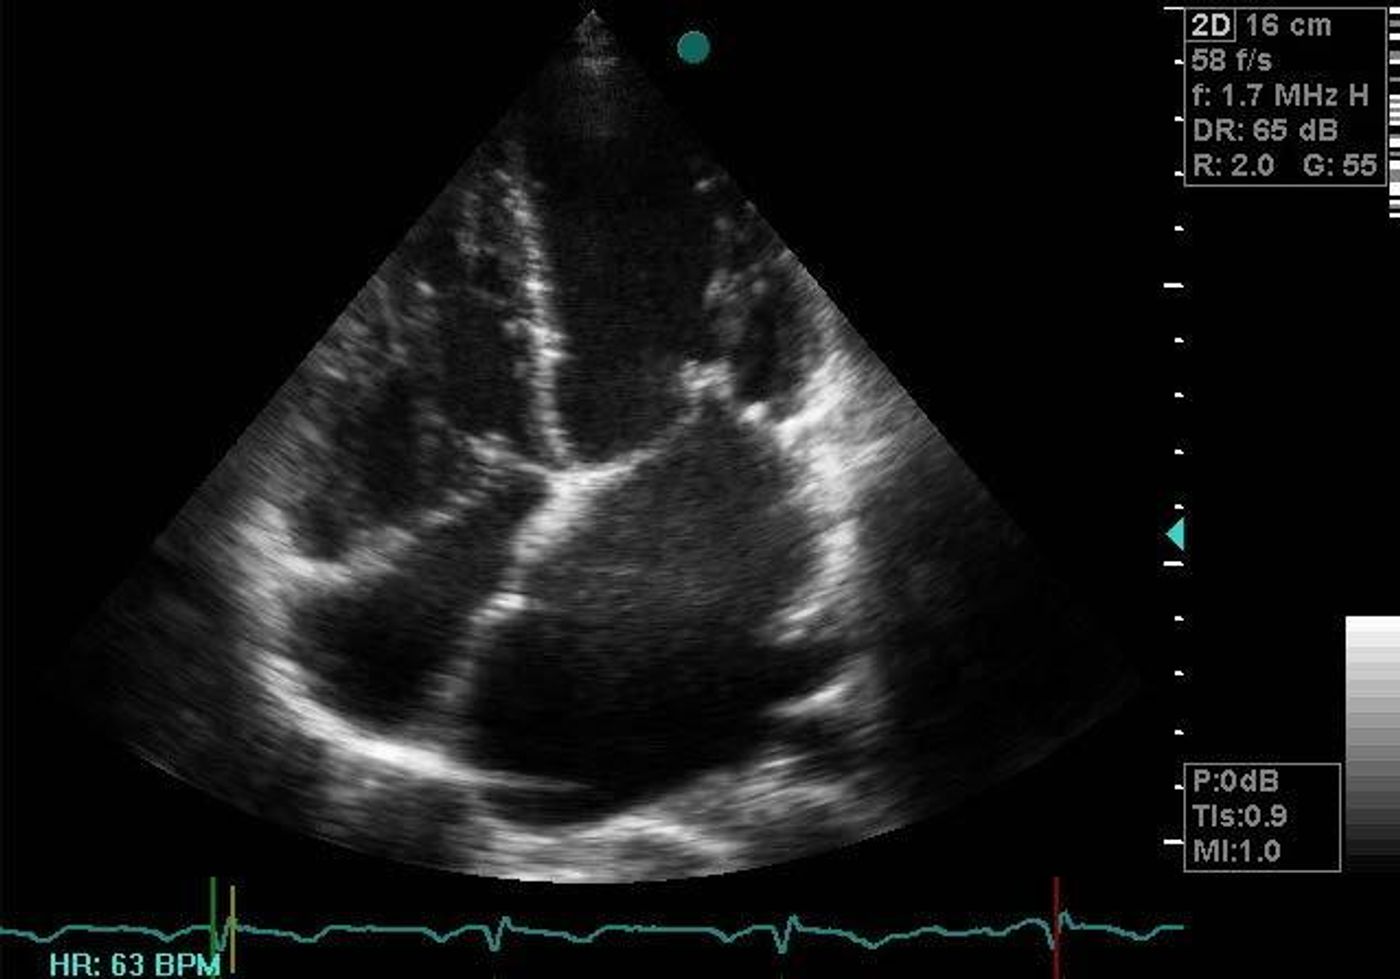 Rheumatic mitral stenosis visualized by transthoracic echocardiogram, South Africa, 2009.